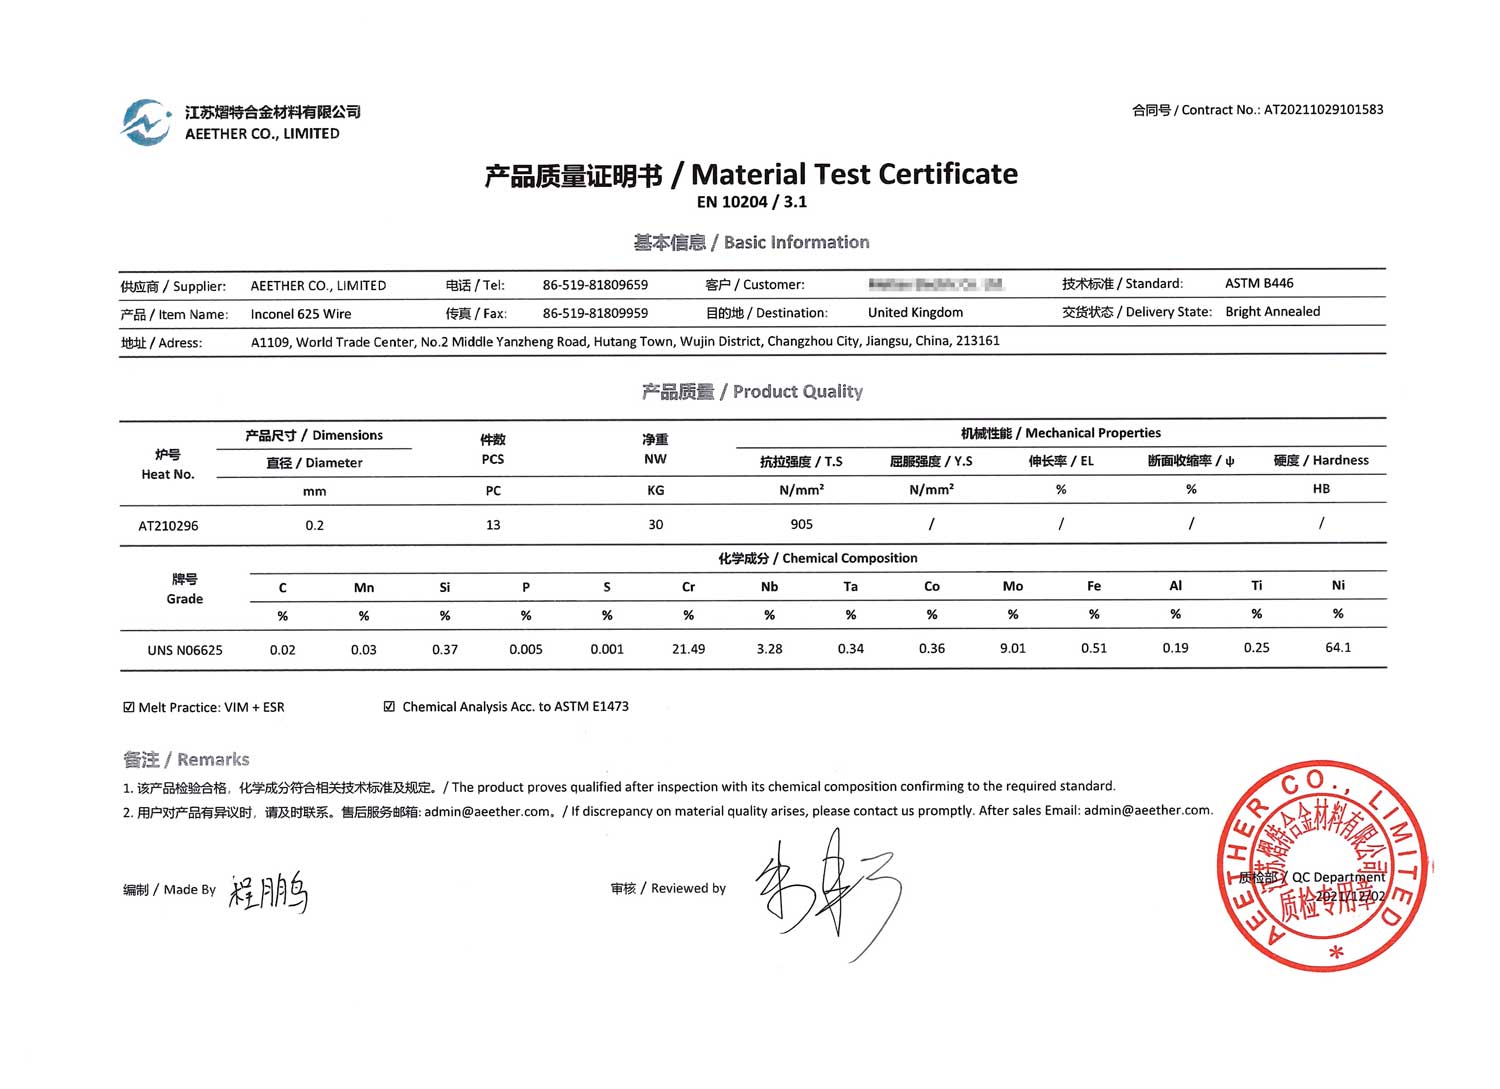 material test certificate for inconel 625 wire